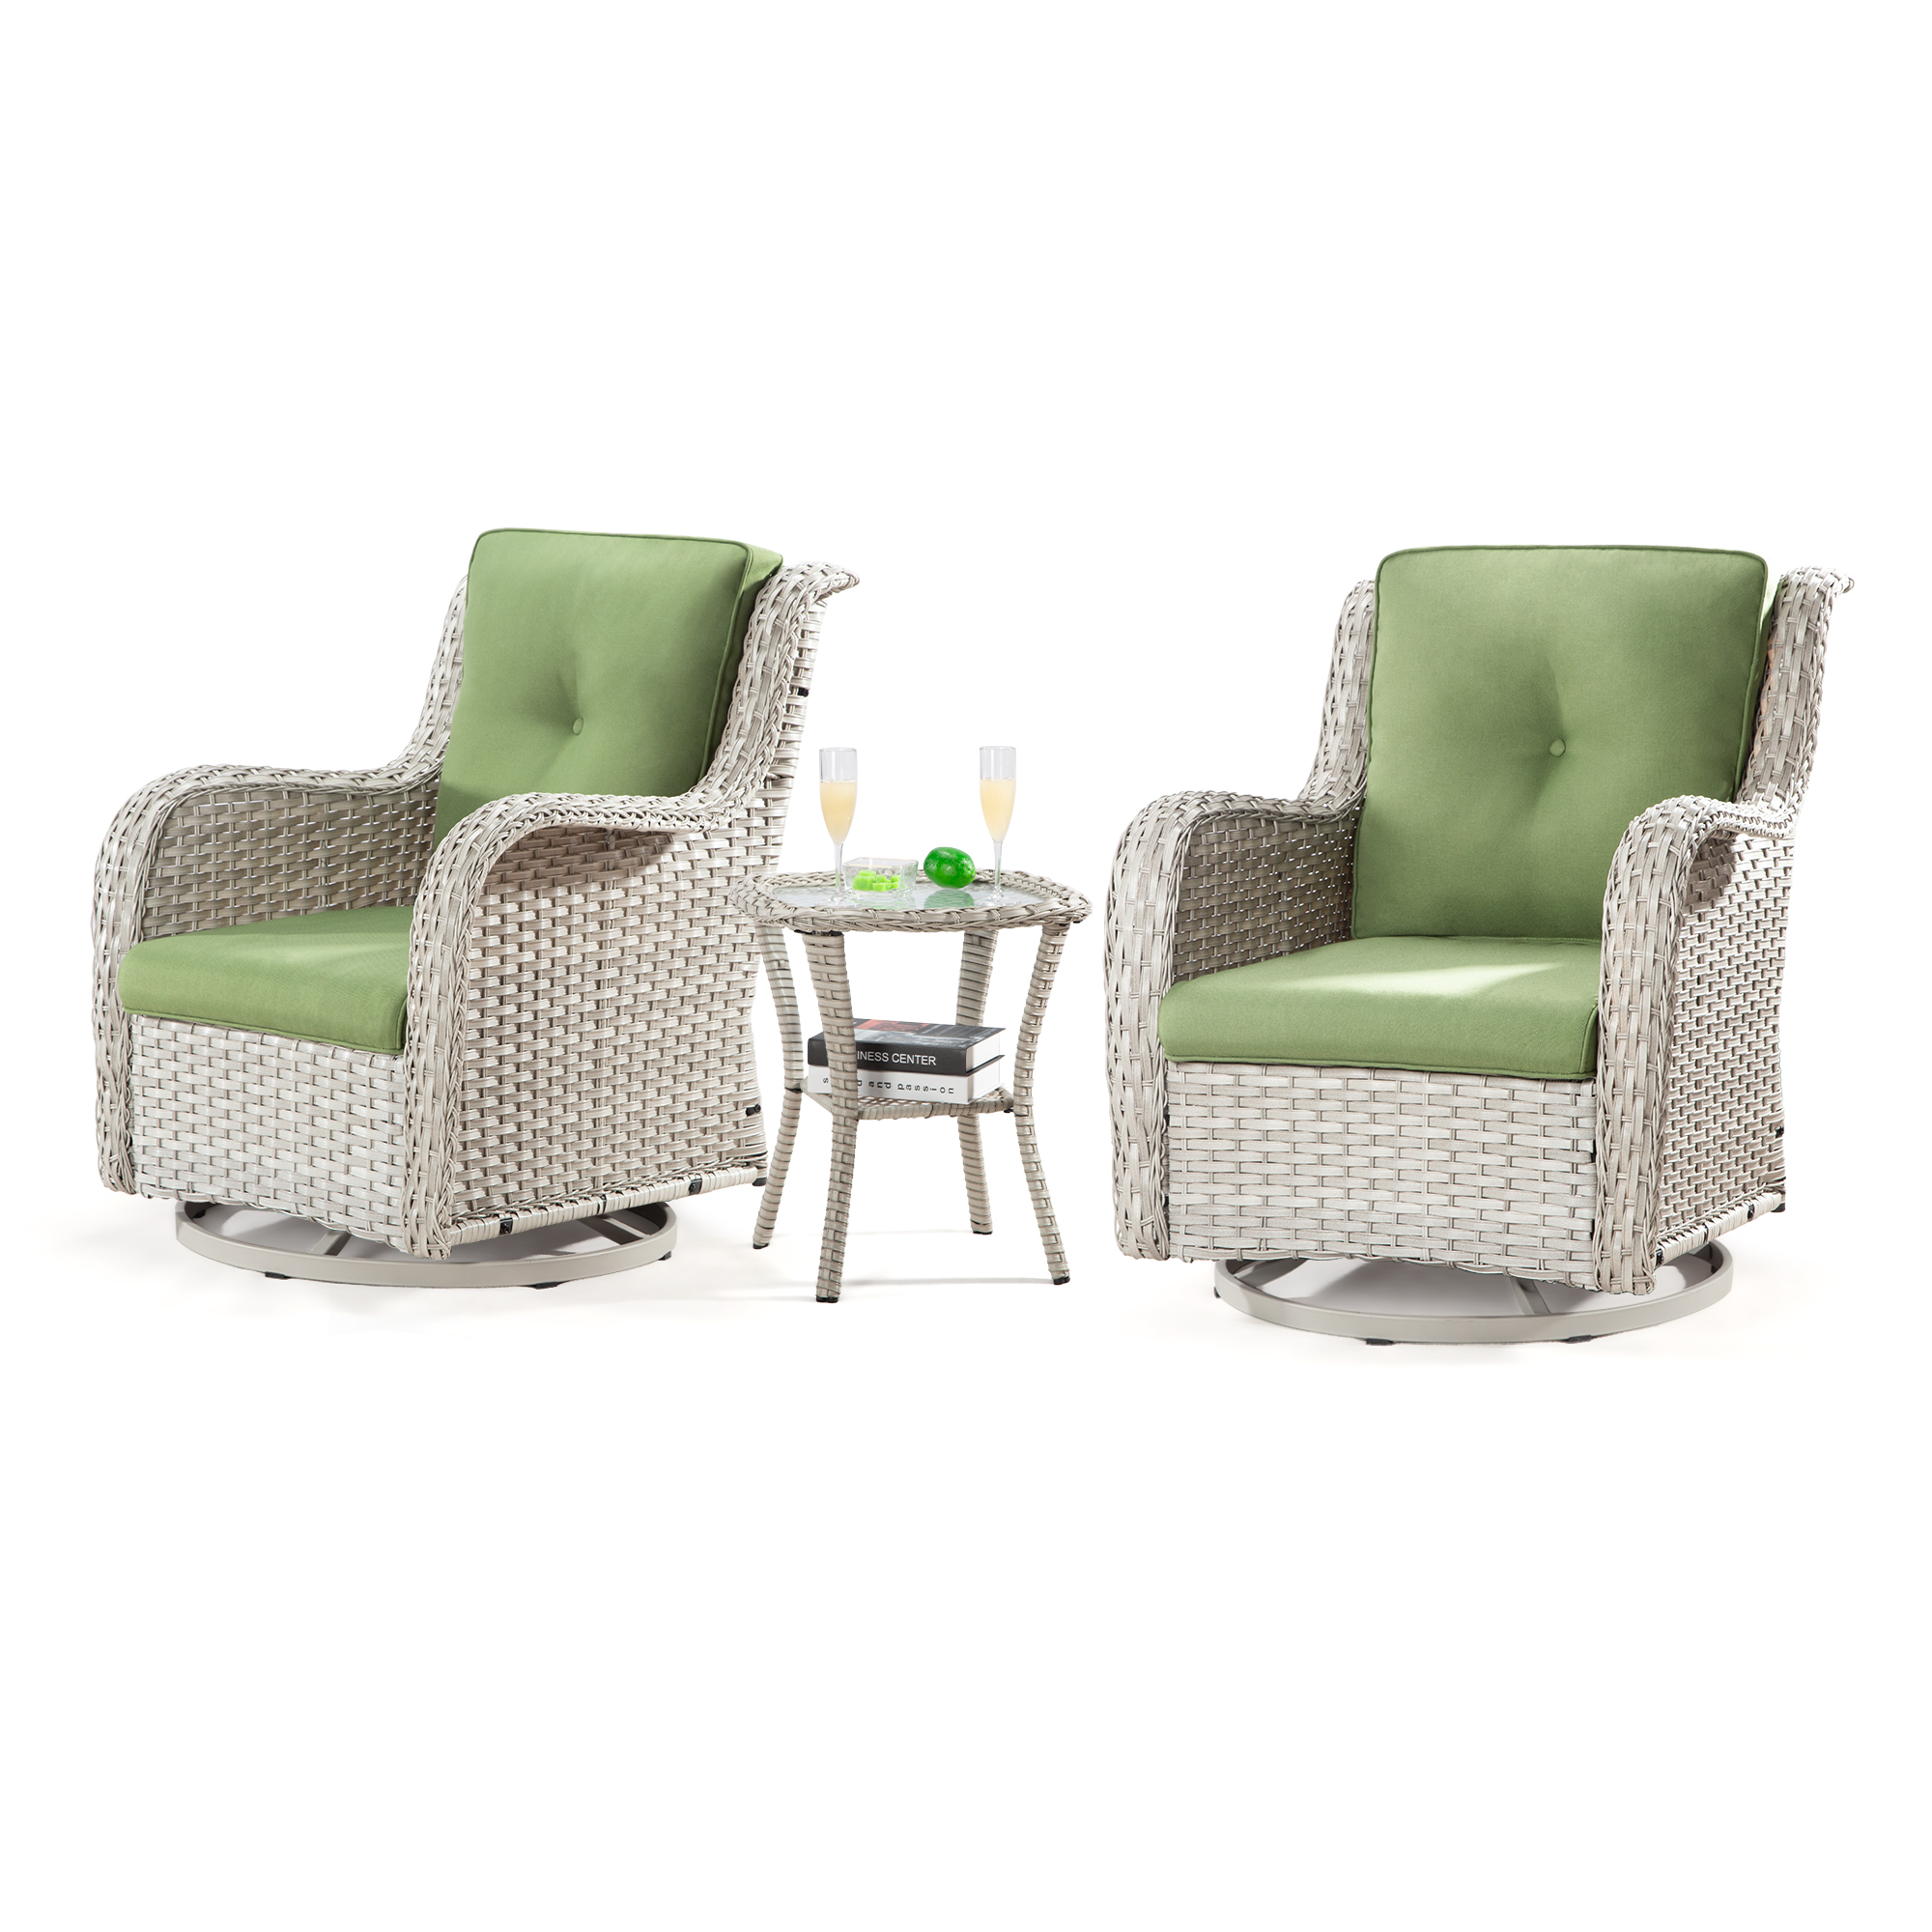 Meetleisure Outdoor Swivel Rocker Wicker Patio Chairs Sets of 2 With Table, Green - image 1 of 5